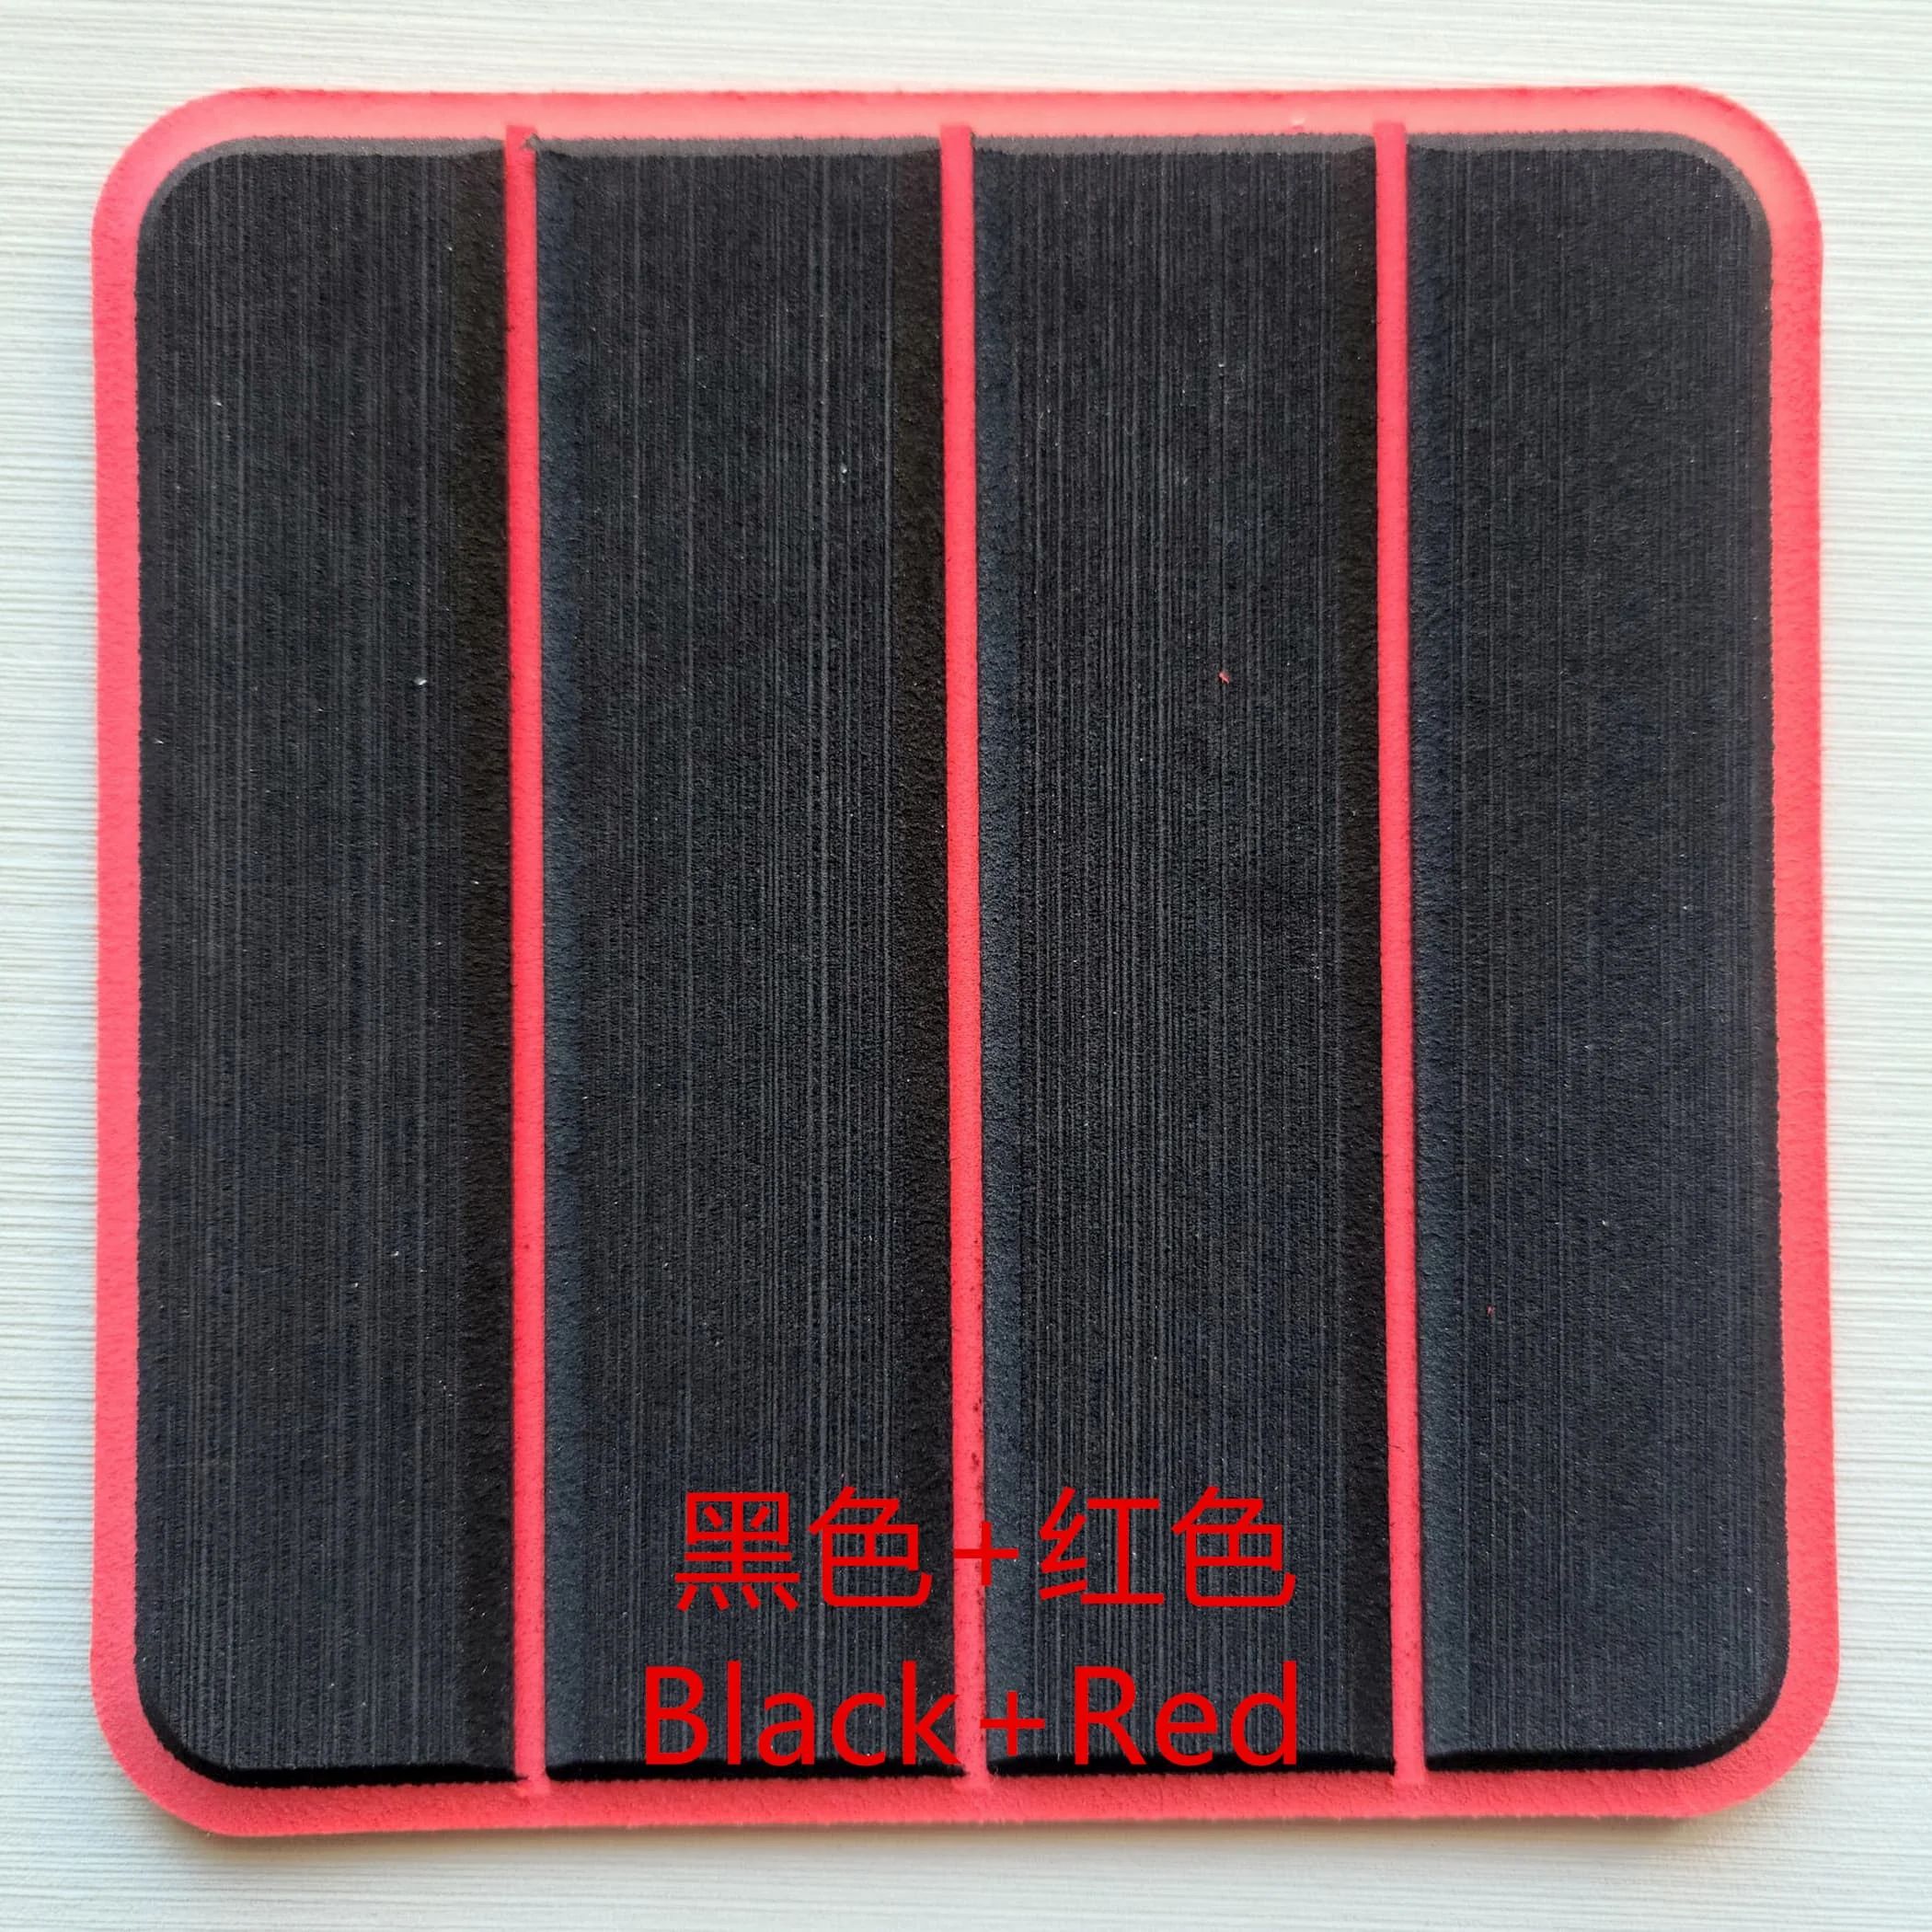 Color:Black over red